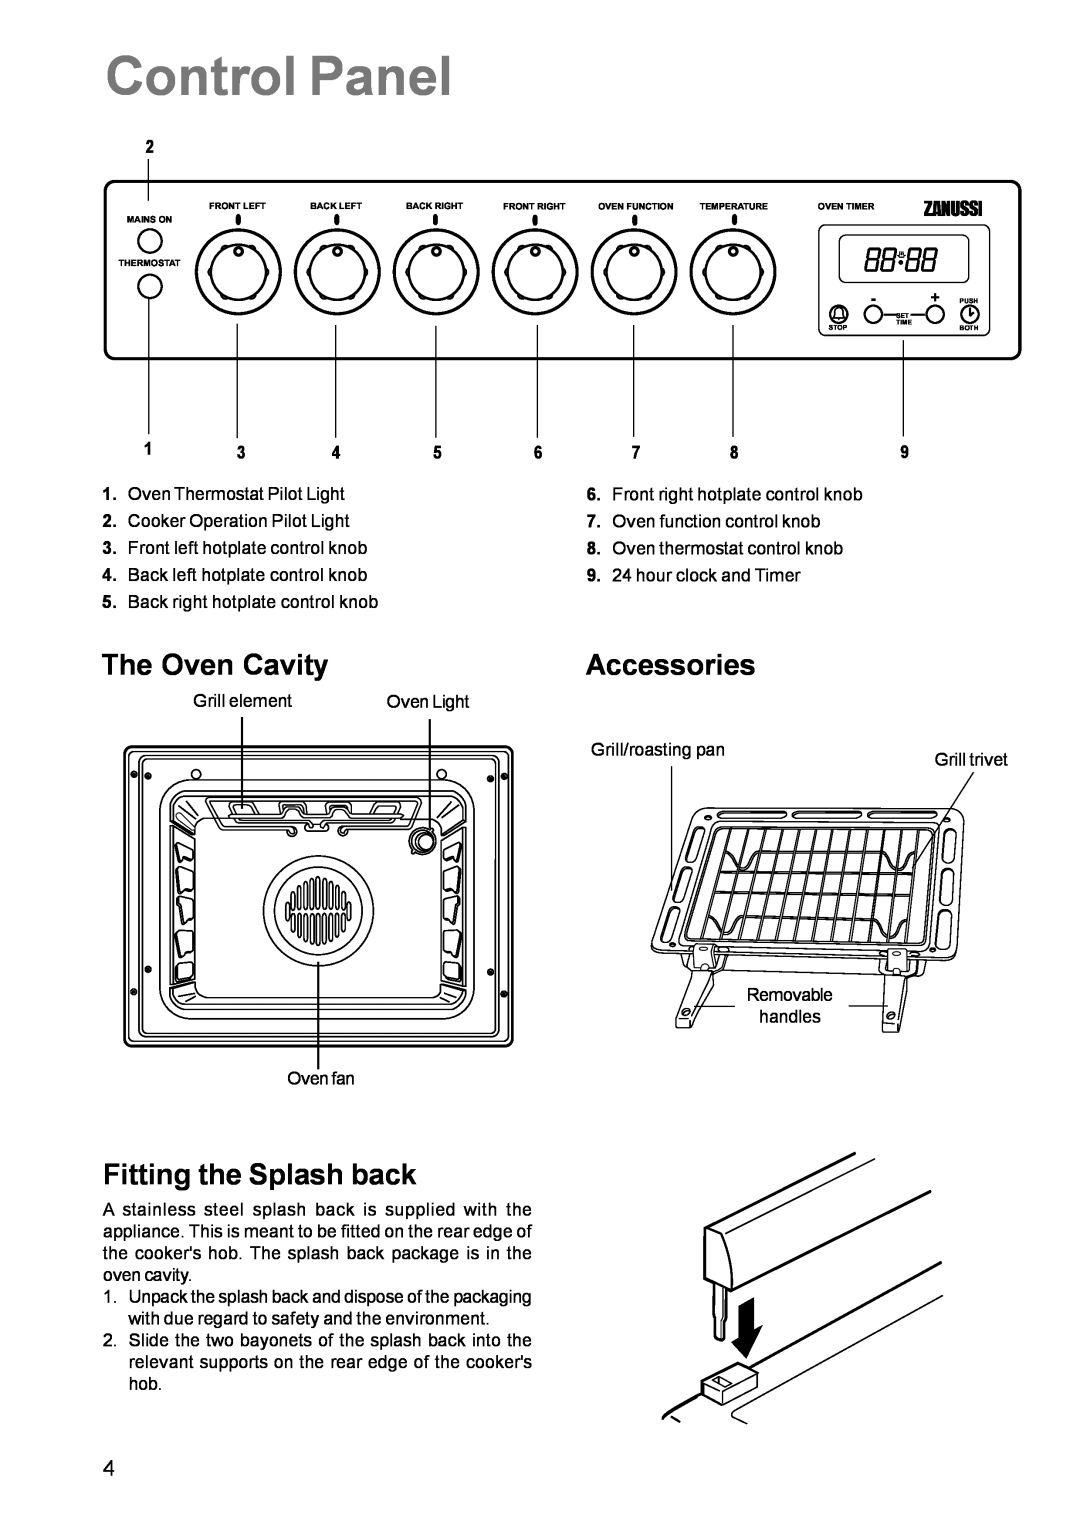 Zanussi ZCE 611 manual Control Panel, The Oven Cavity, Accessories, Fitting the Splash back 